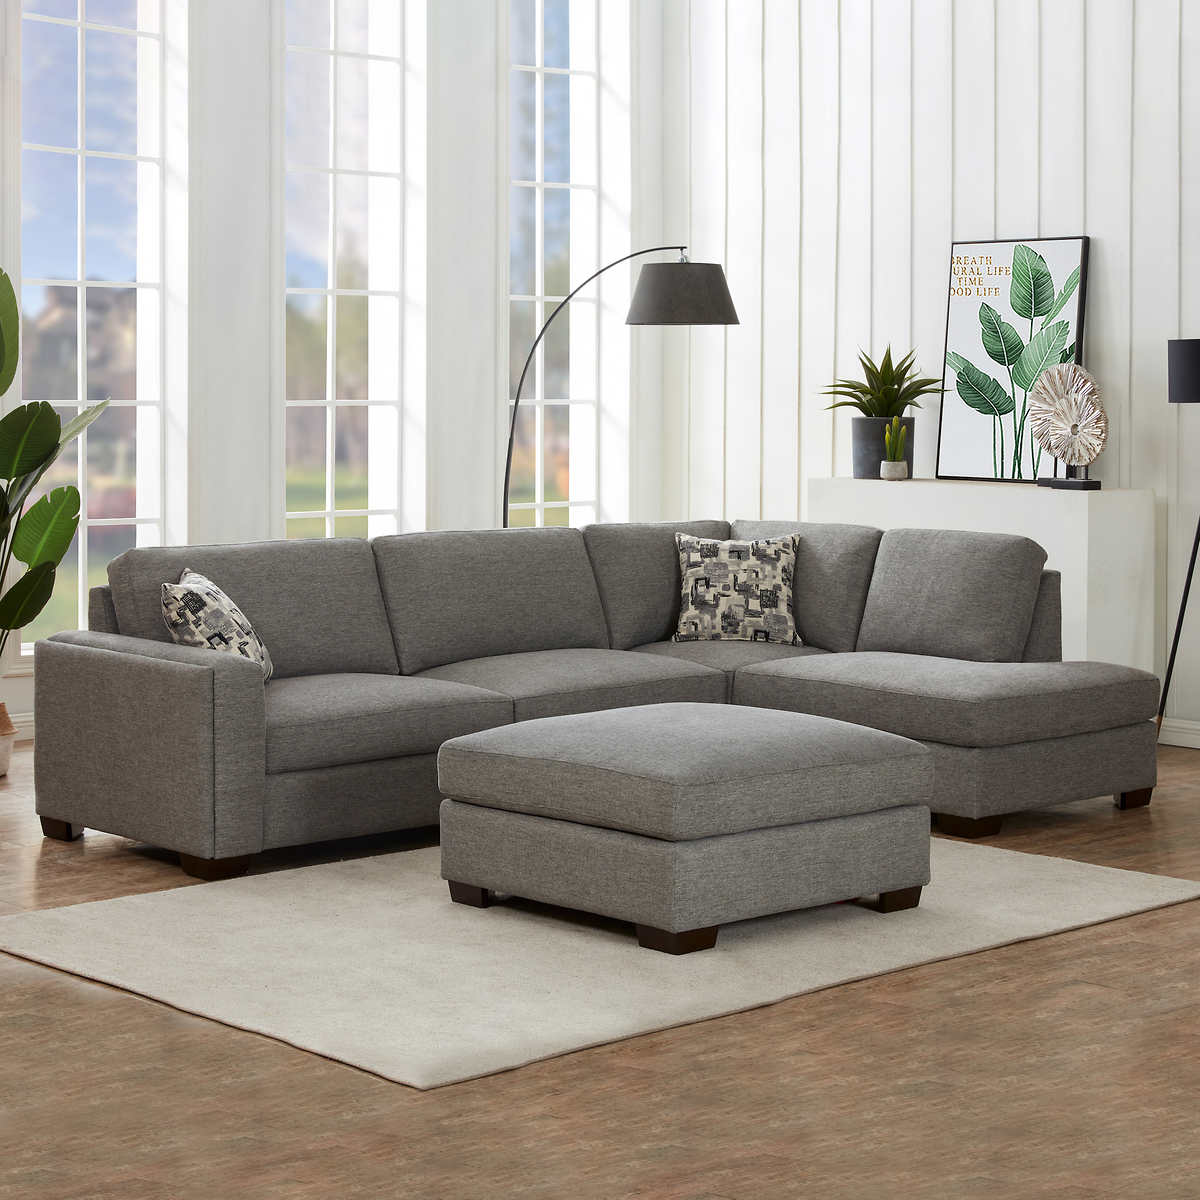 Maycen Fabric Sectional Costco, Synergy Home Fabric Sleeper Sofa Costco Reviews